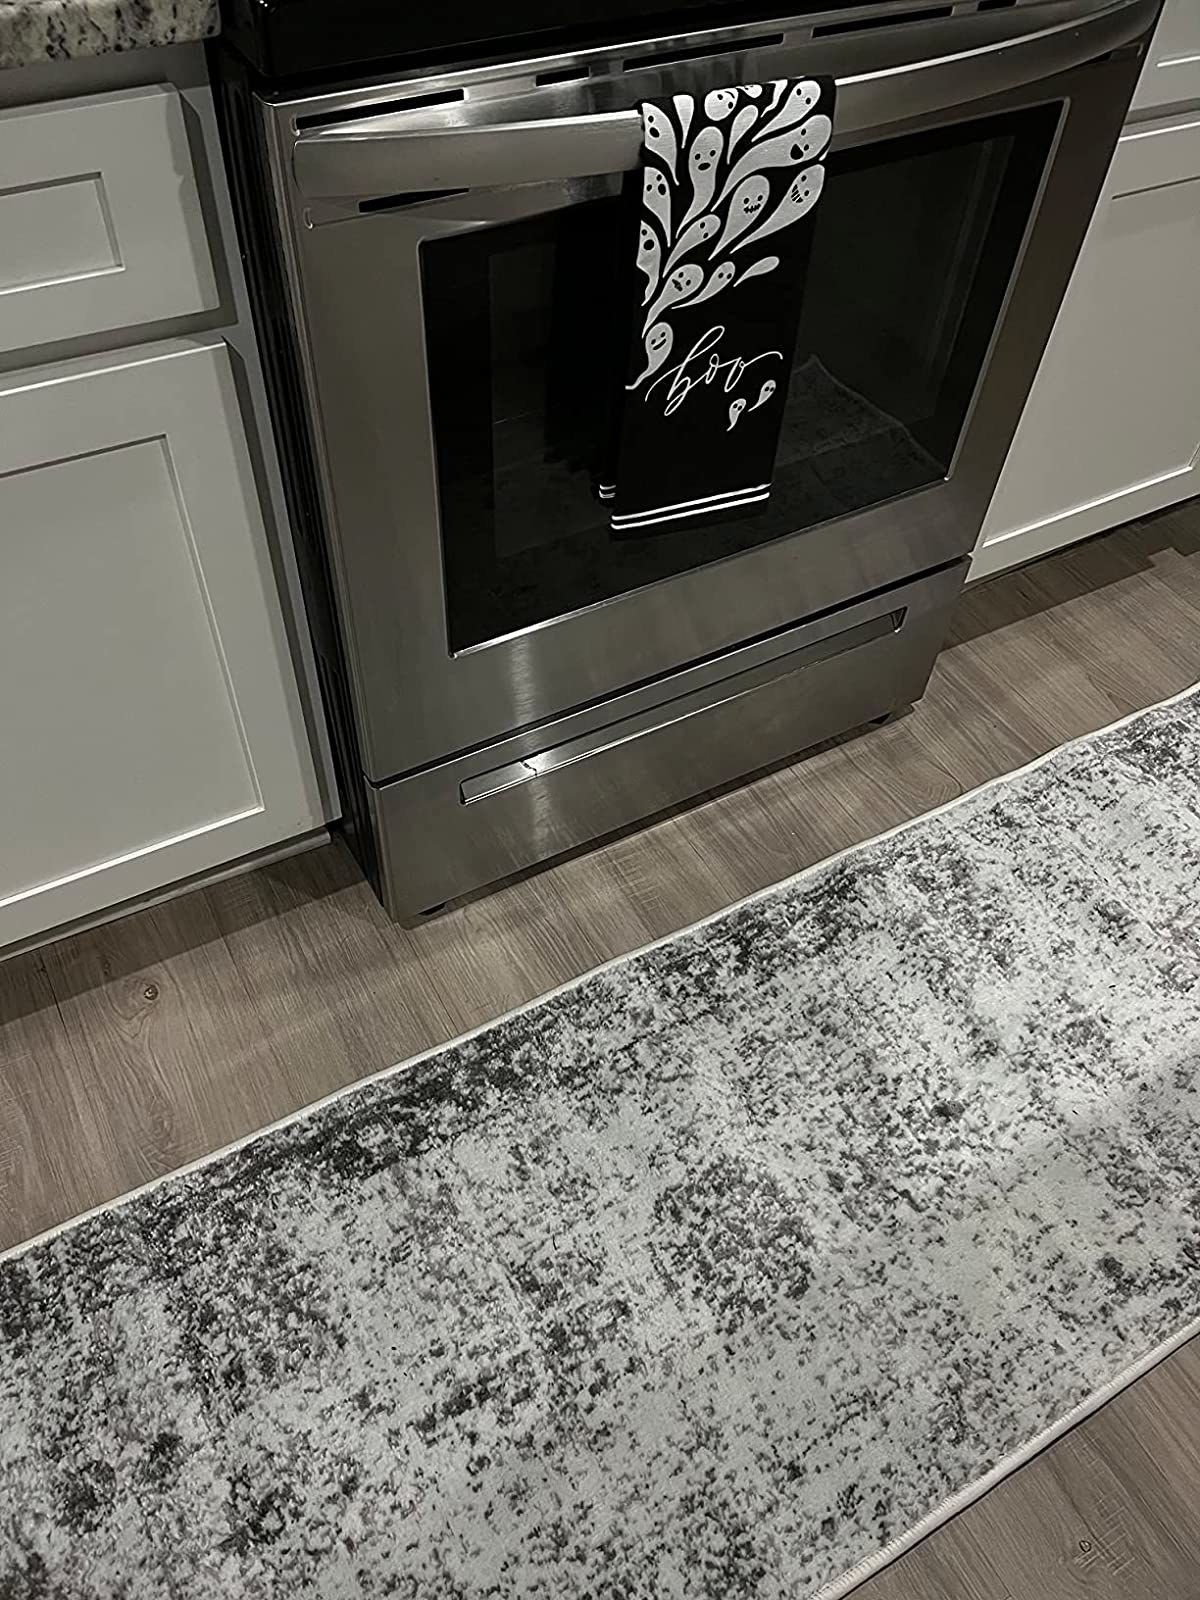 Reviewer image of rug in front of the stove in a kitchen